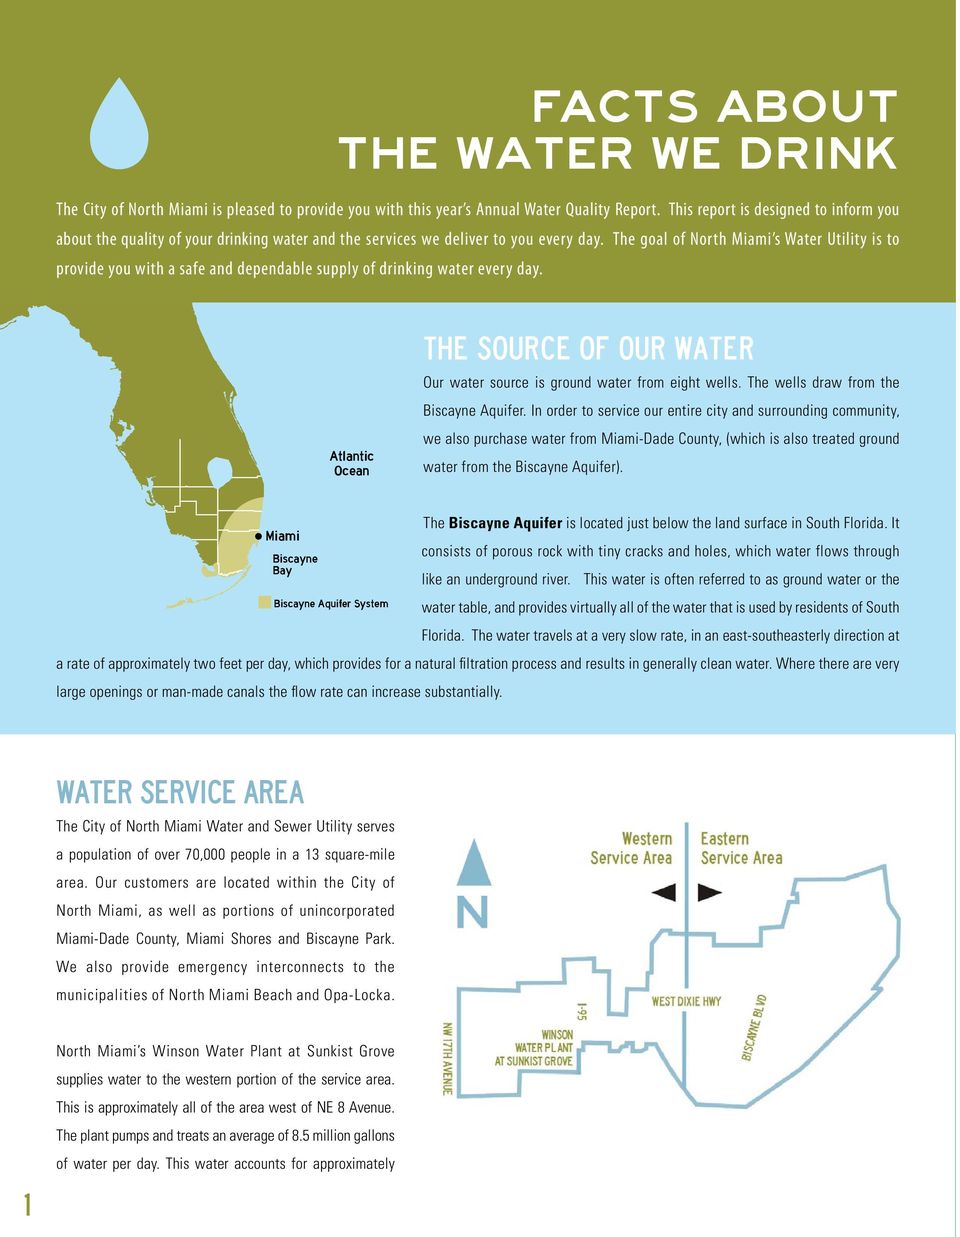 The goal of North Miami s Water Utility is to provide you with a safe and dependable supply of drinking water every day.